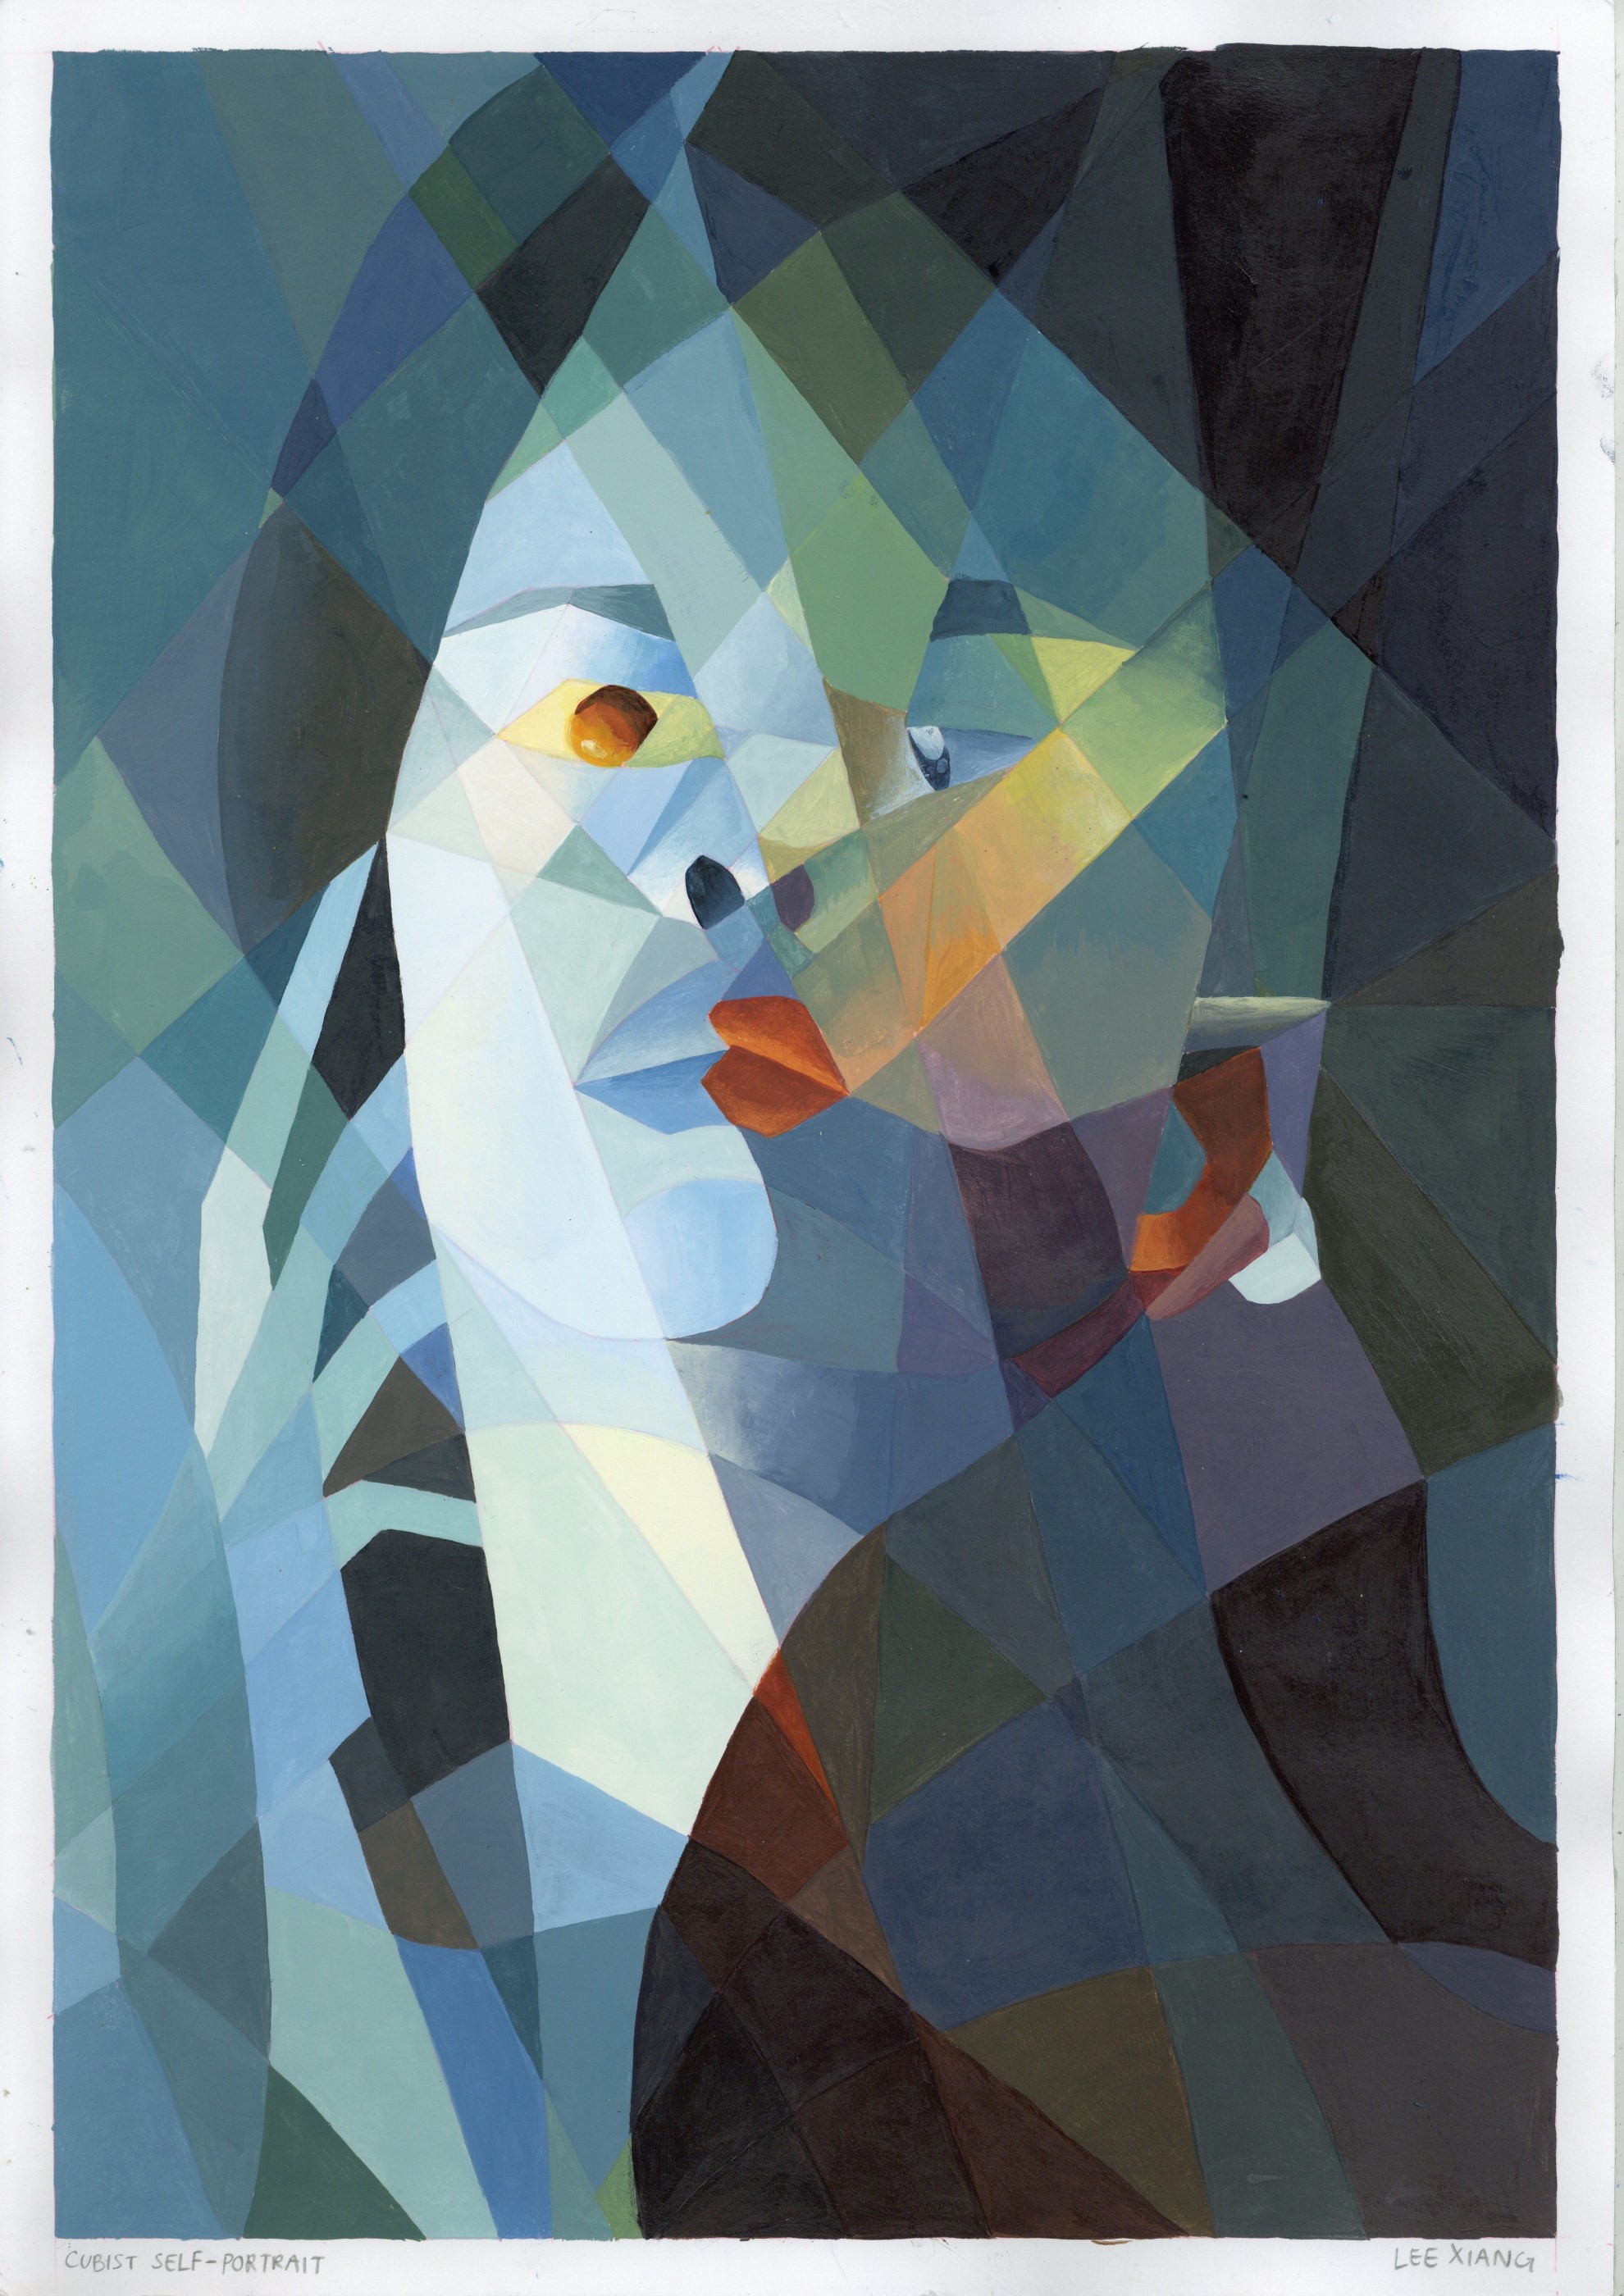 Cubist style traditional painting of an artist self-portrait